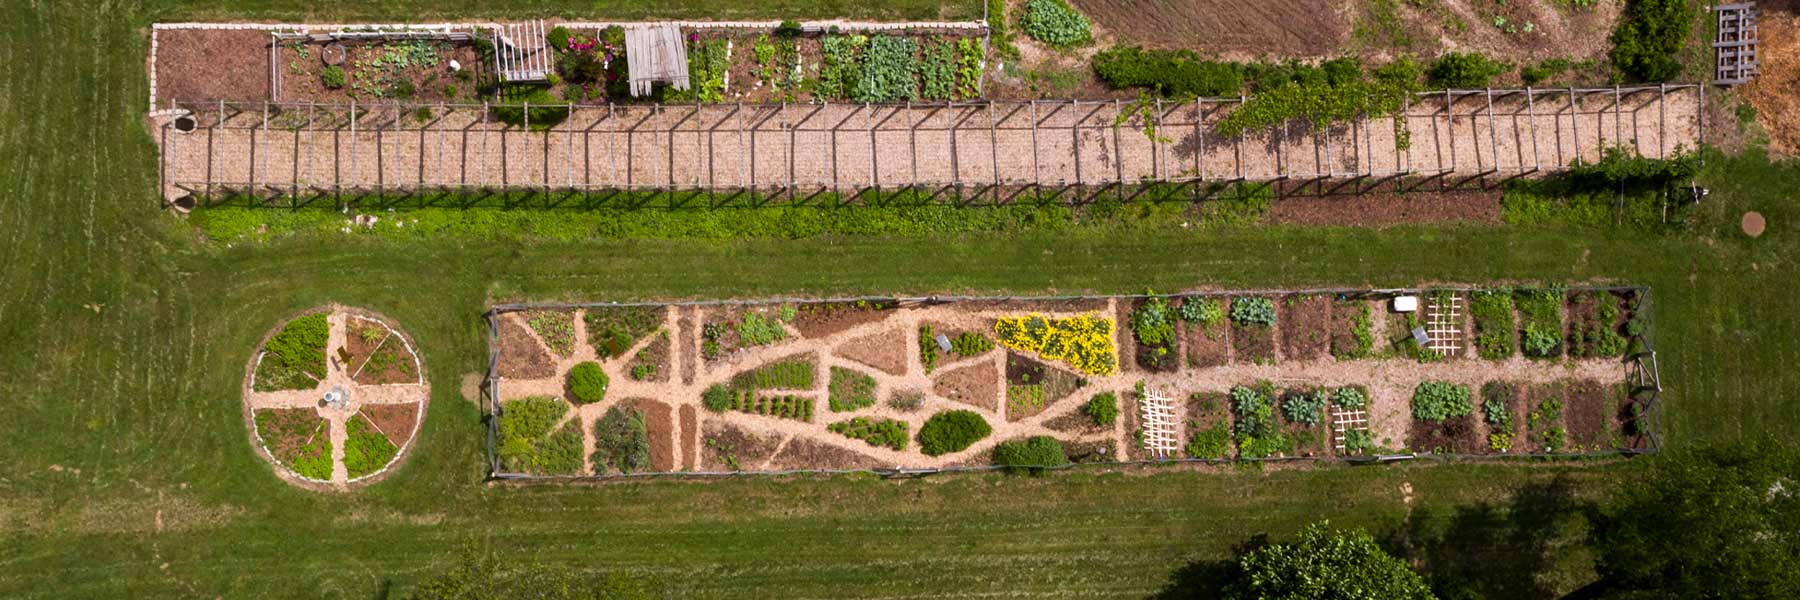 A carefully tilled geometric garden, shot from above and divided into sections.